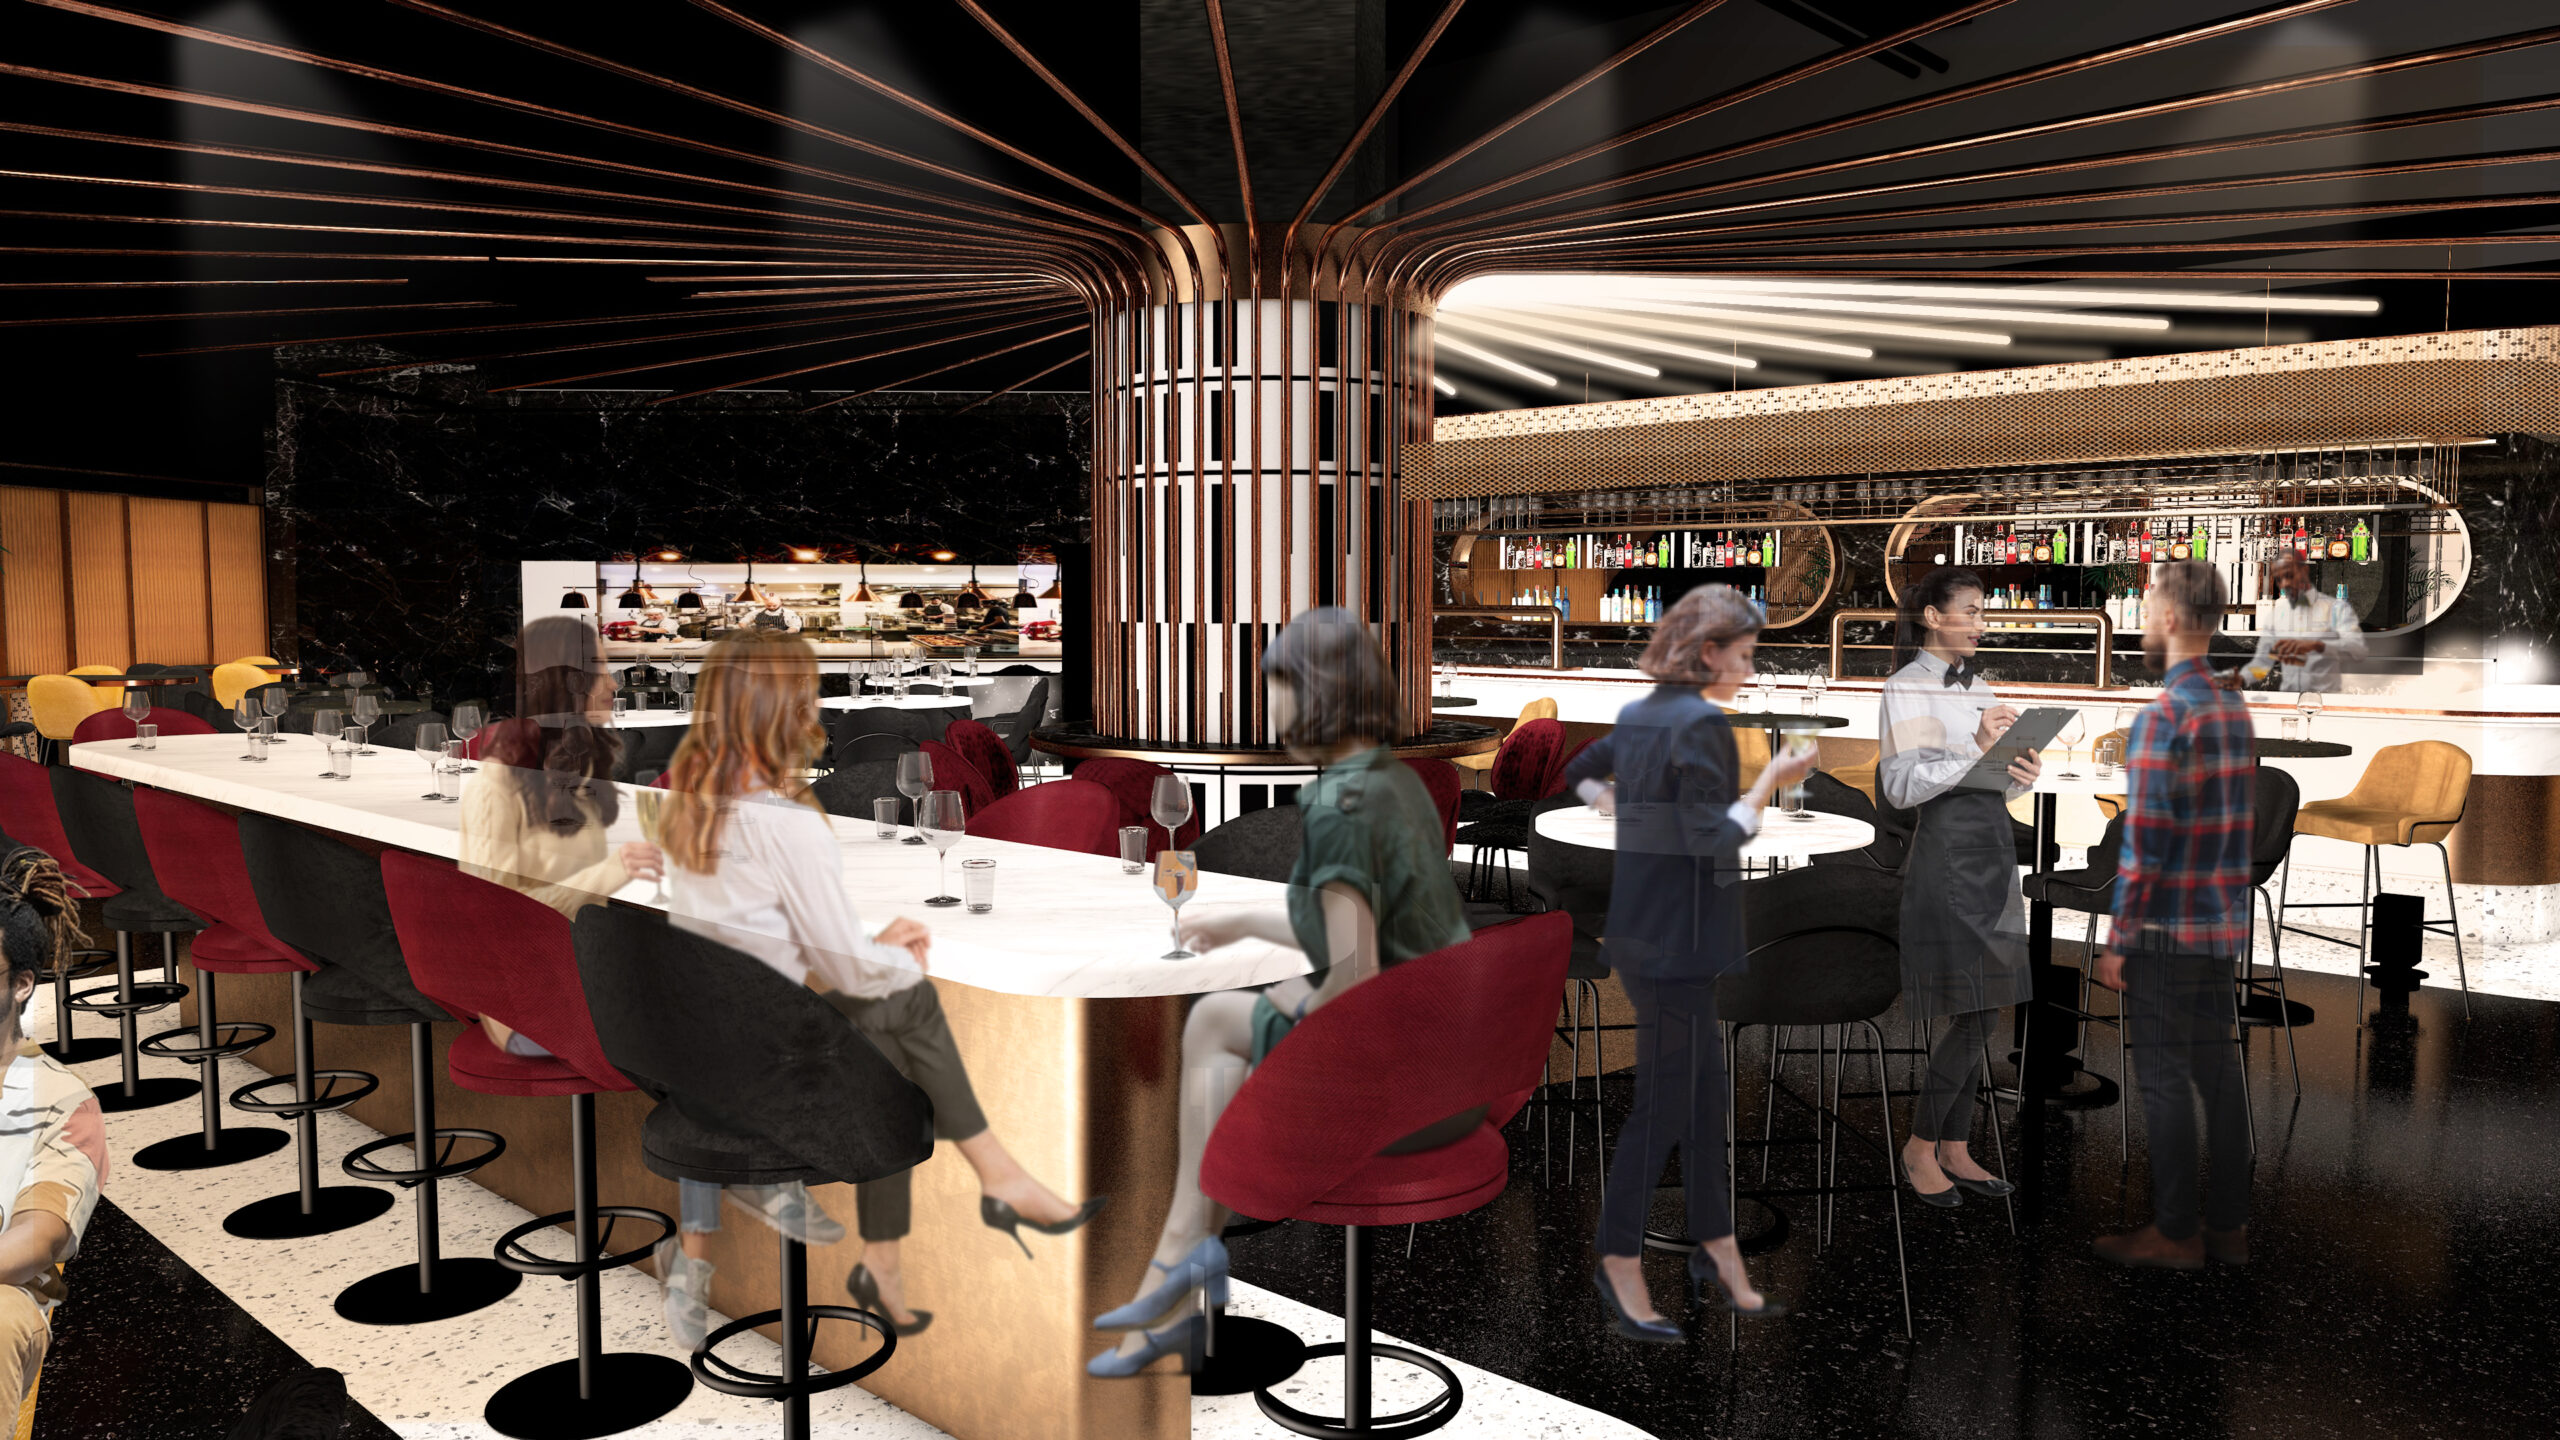 The AO Arena will have brand new bars for fans